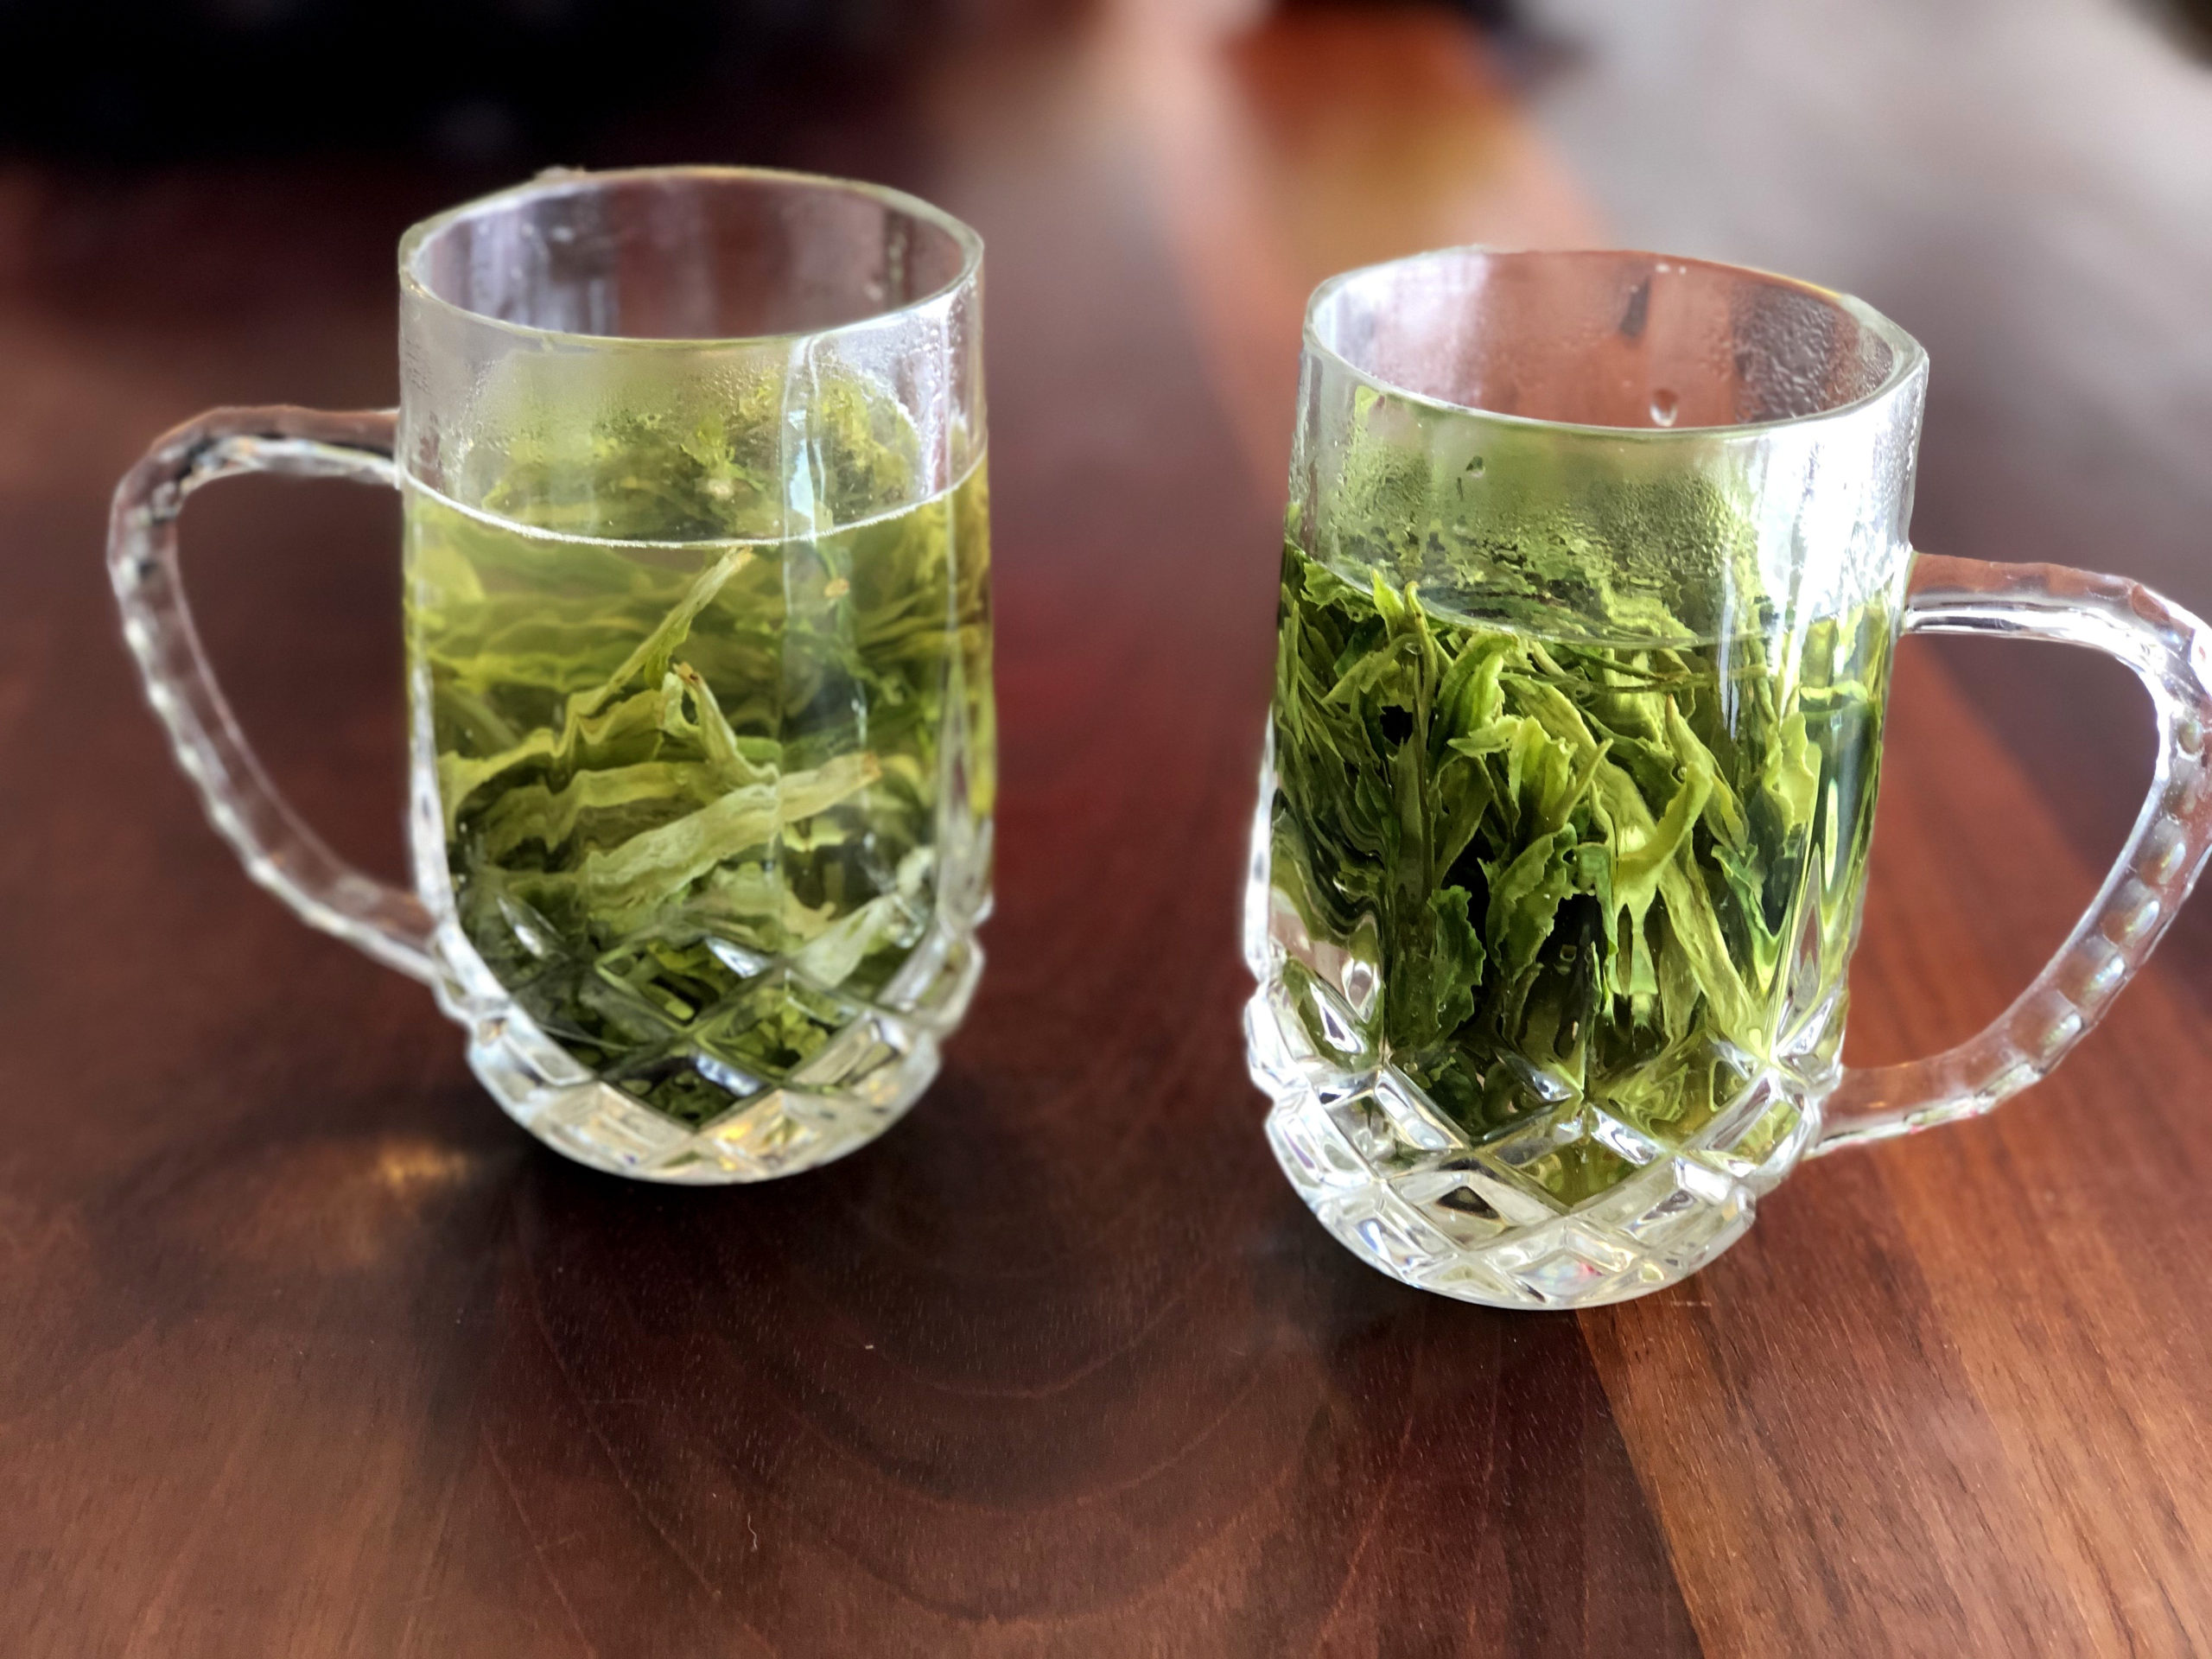 Two glass mugs sit on a wooden table. The mugs are filled with large green tea leaves steeping in hot water.